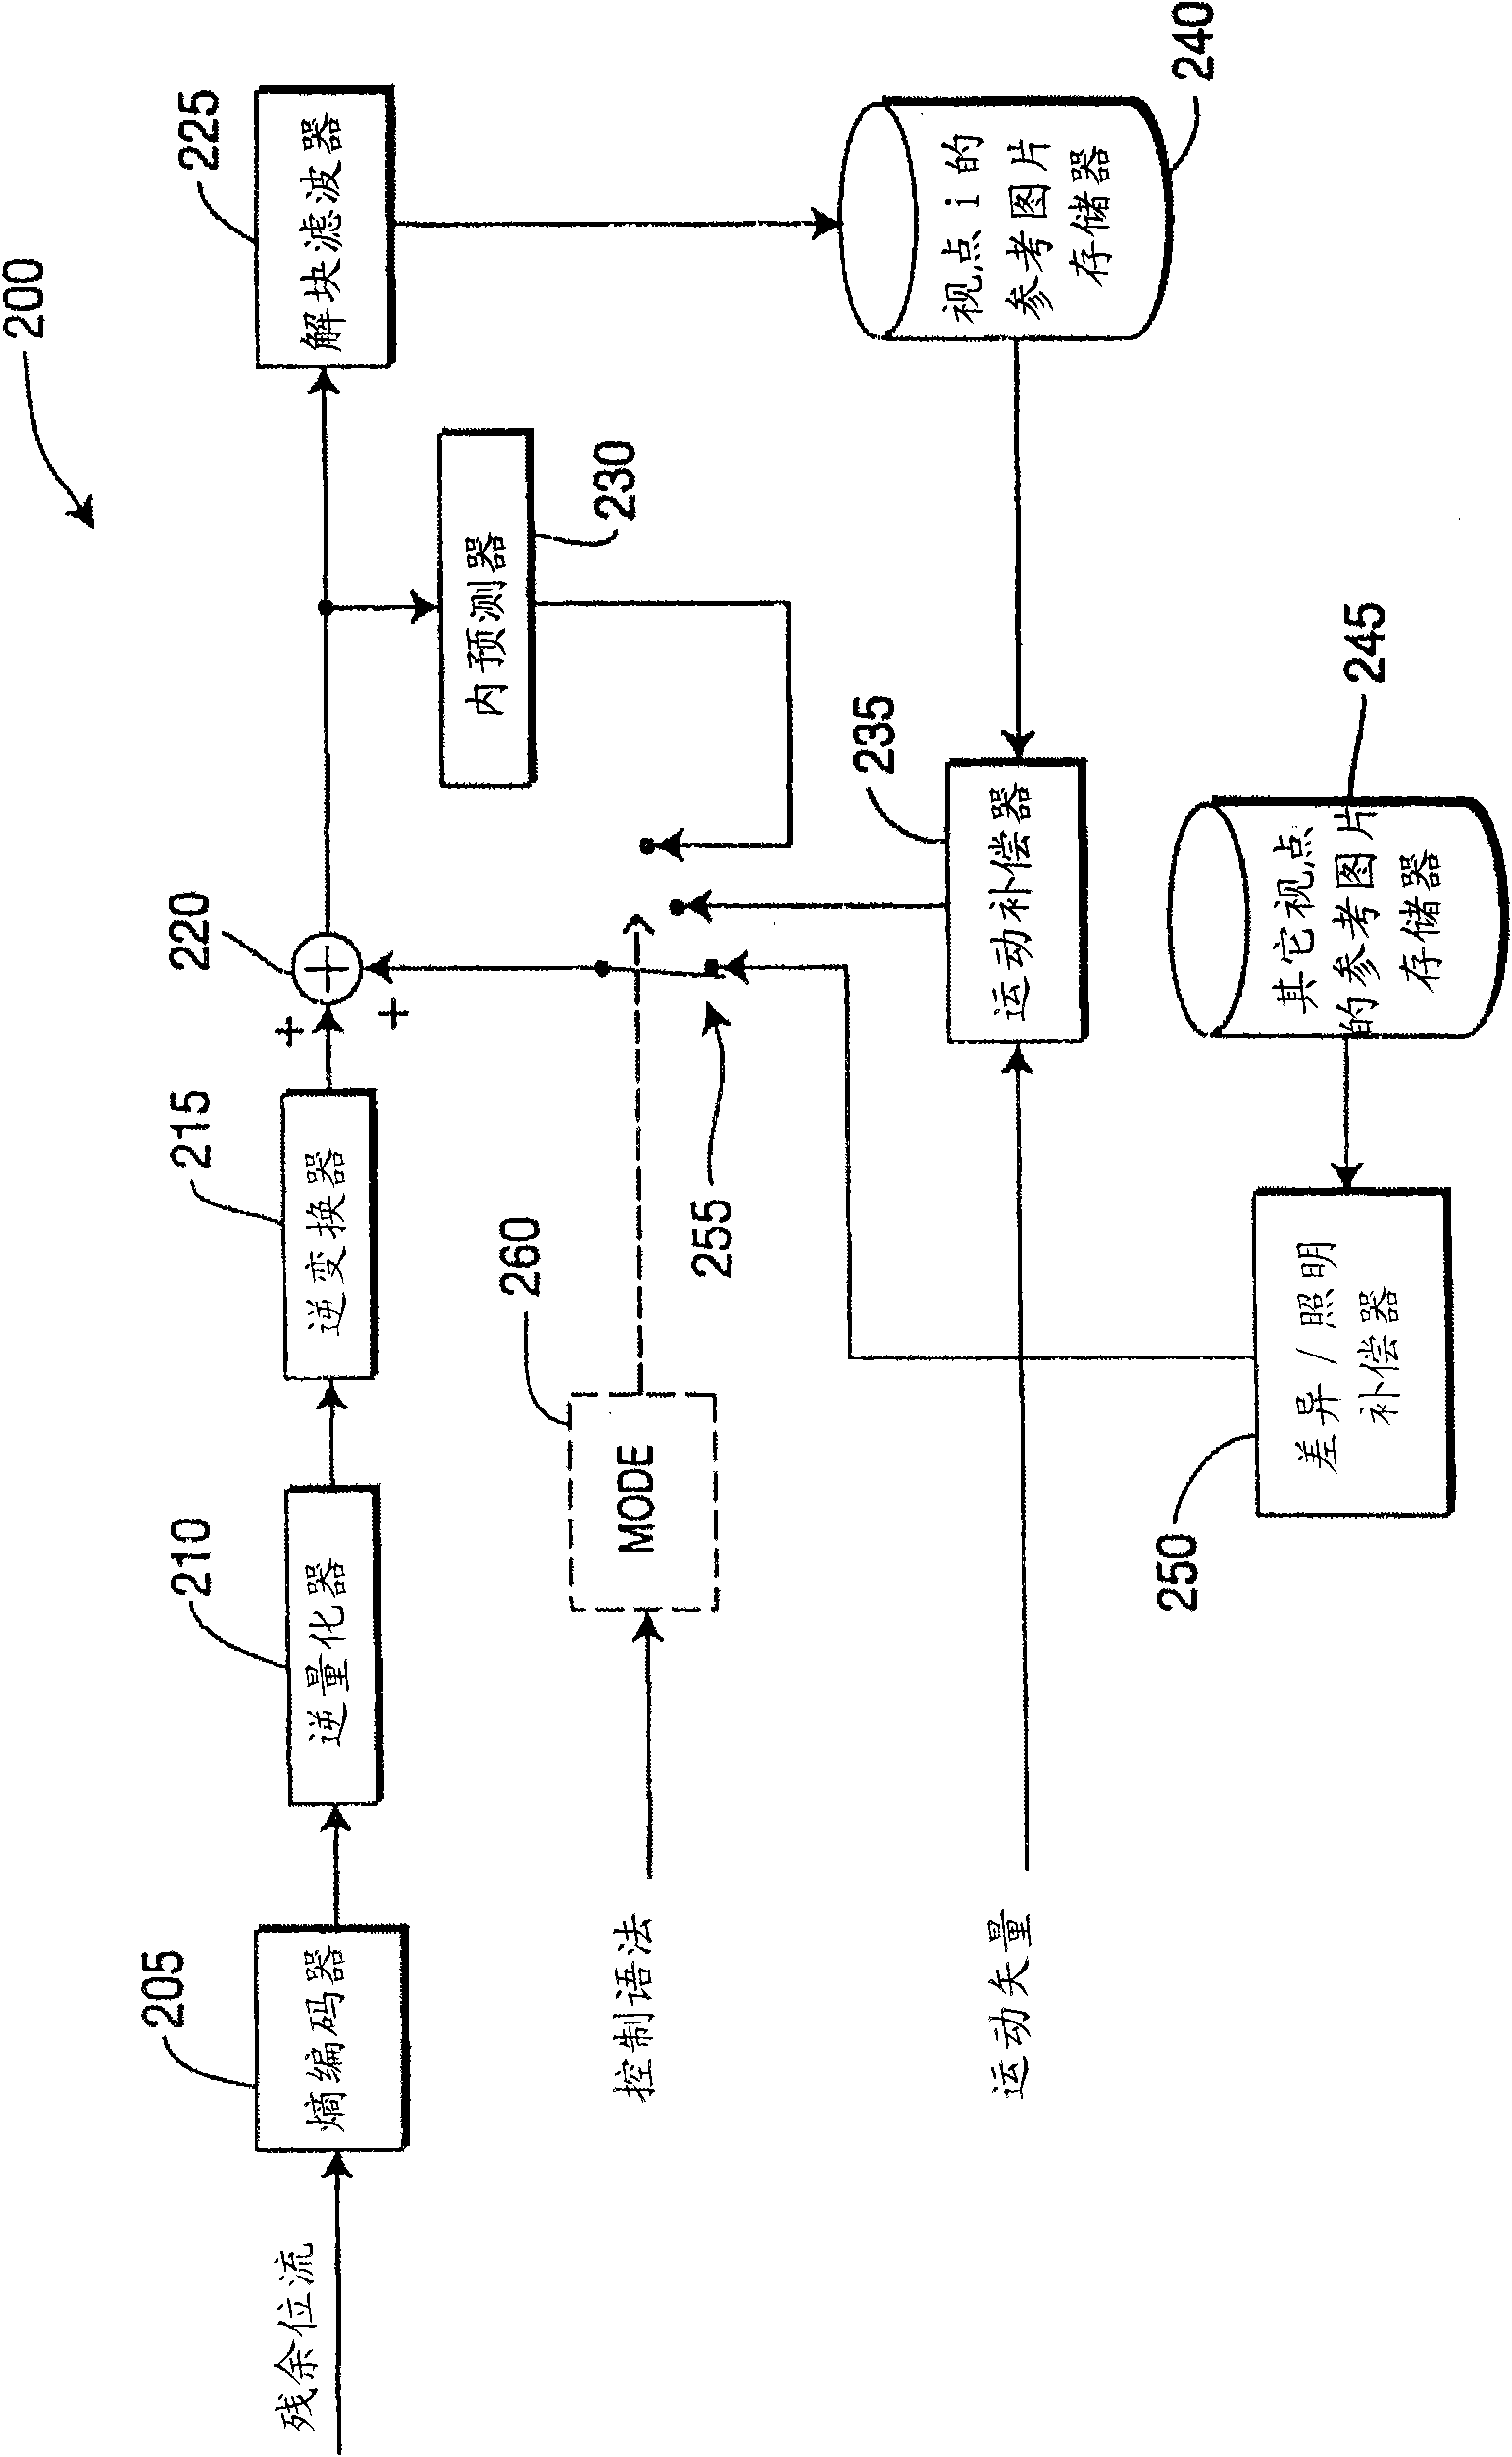 Method and apparatus for local illumination and color compensation without explicit signaling